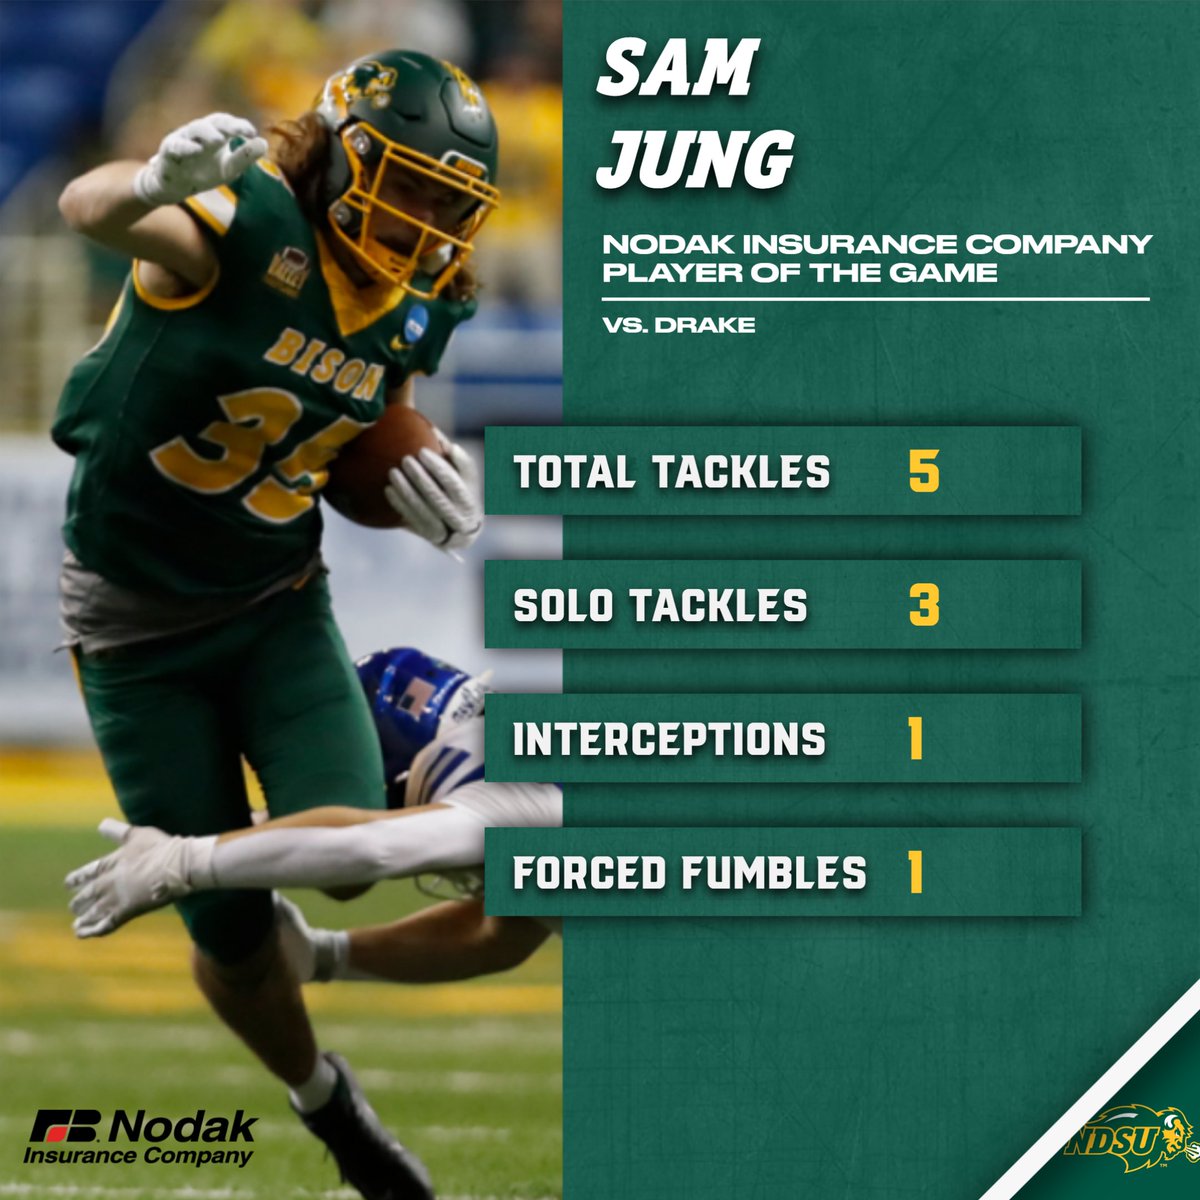 Sam Jung is the Nodak Insurance Company Player of the Game! Jung had an interception, forced fumble, five tackles, and helped the Bison defense to just three points allowed against Drake!